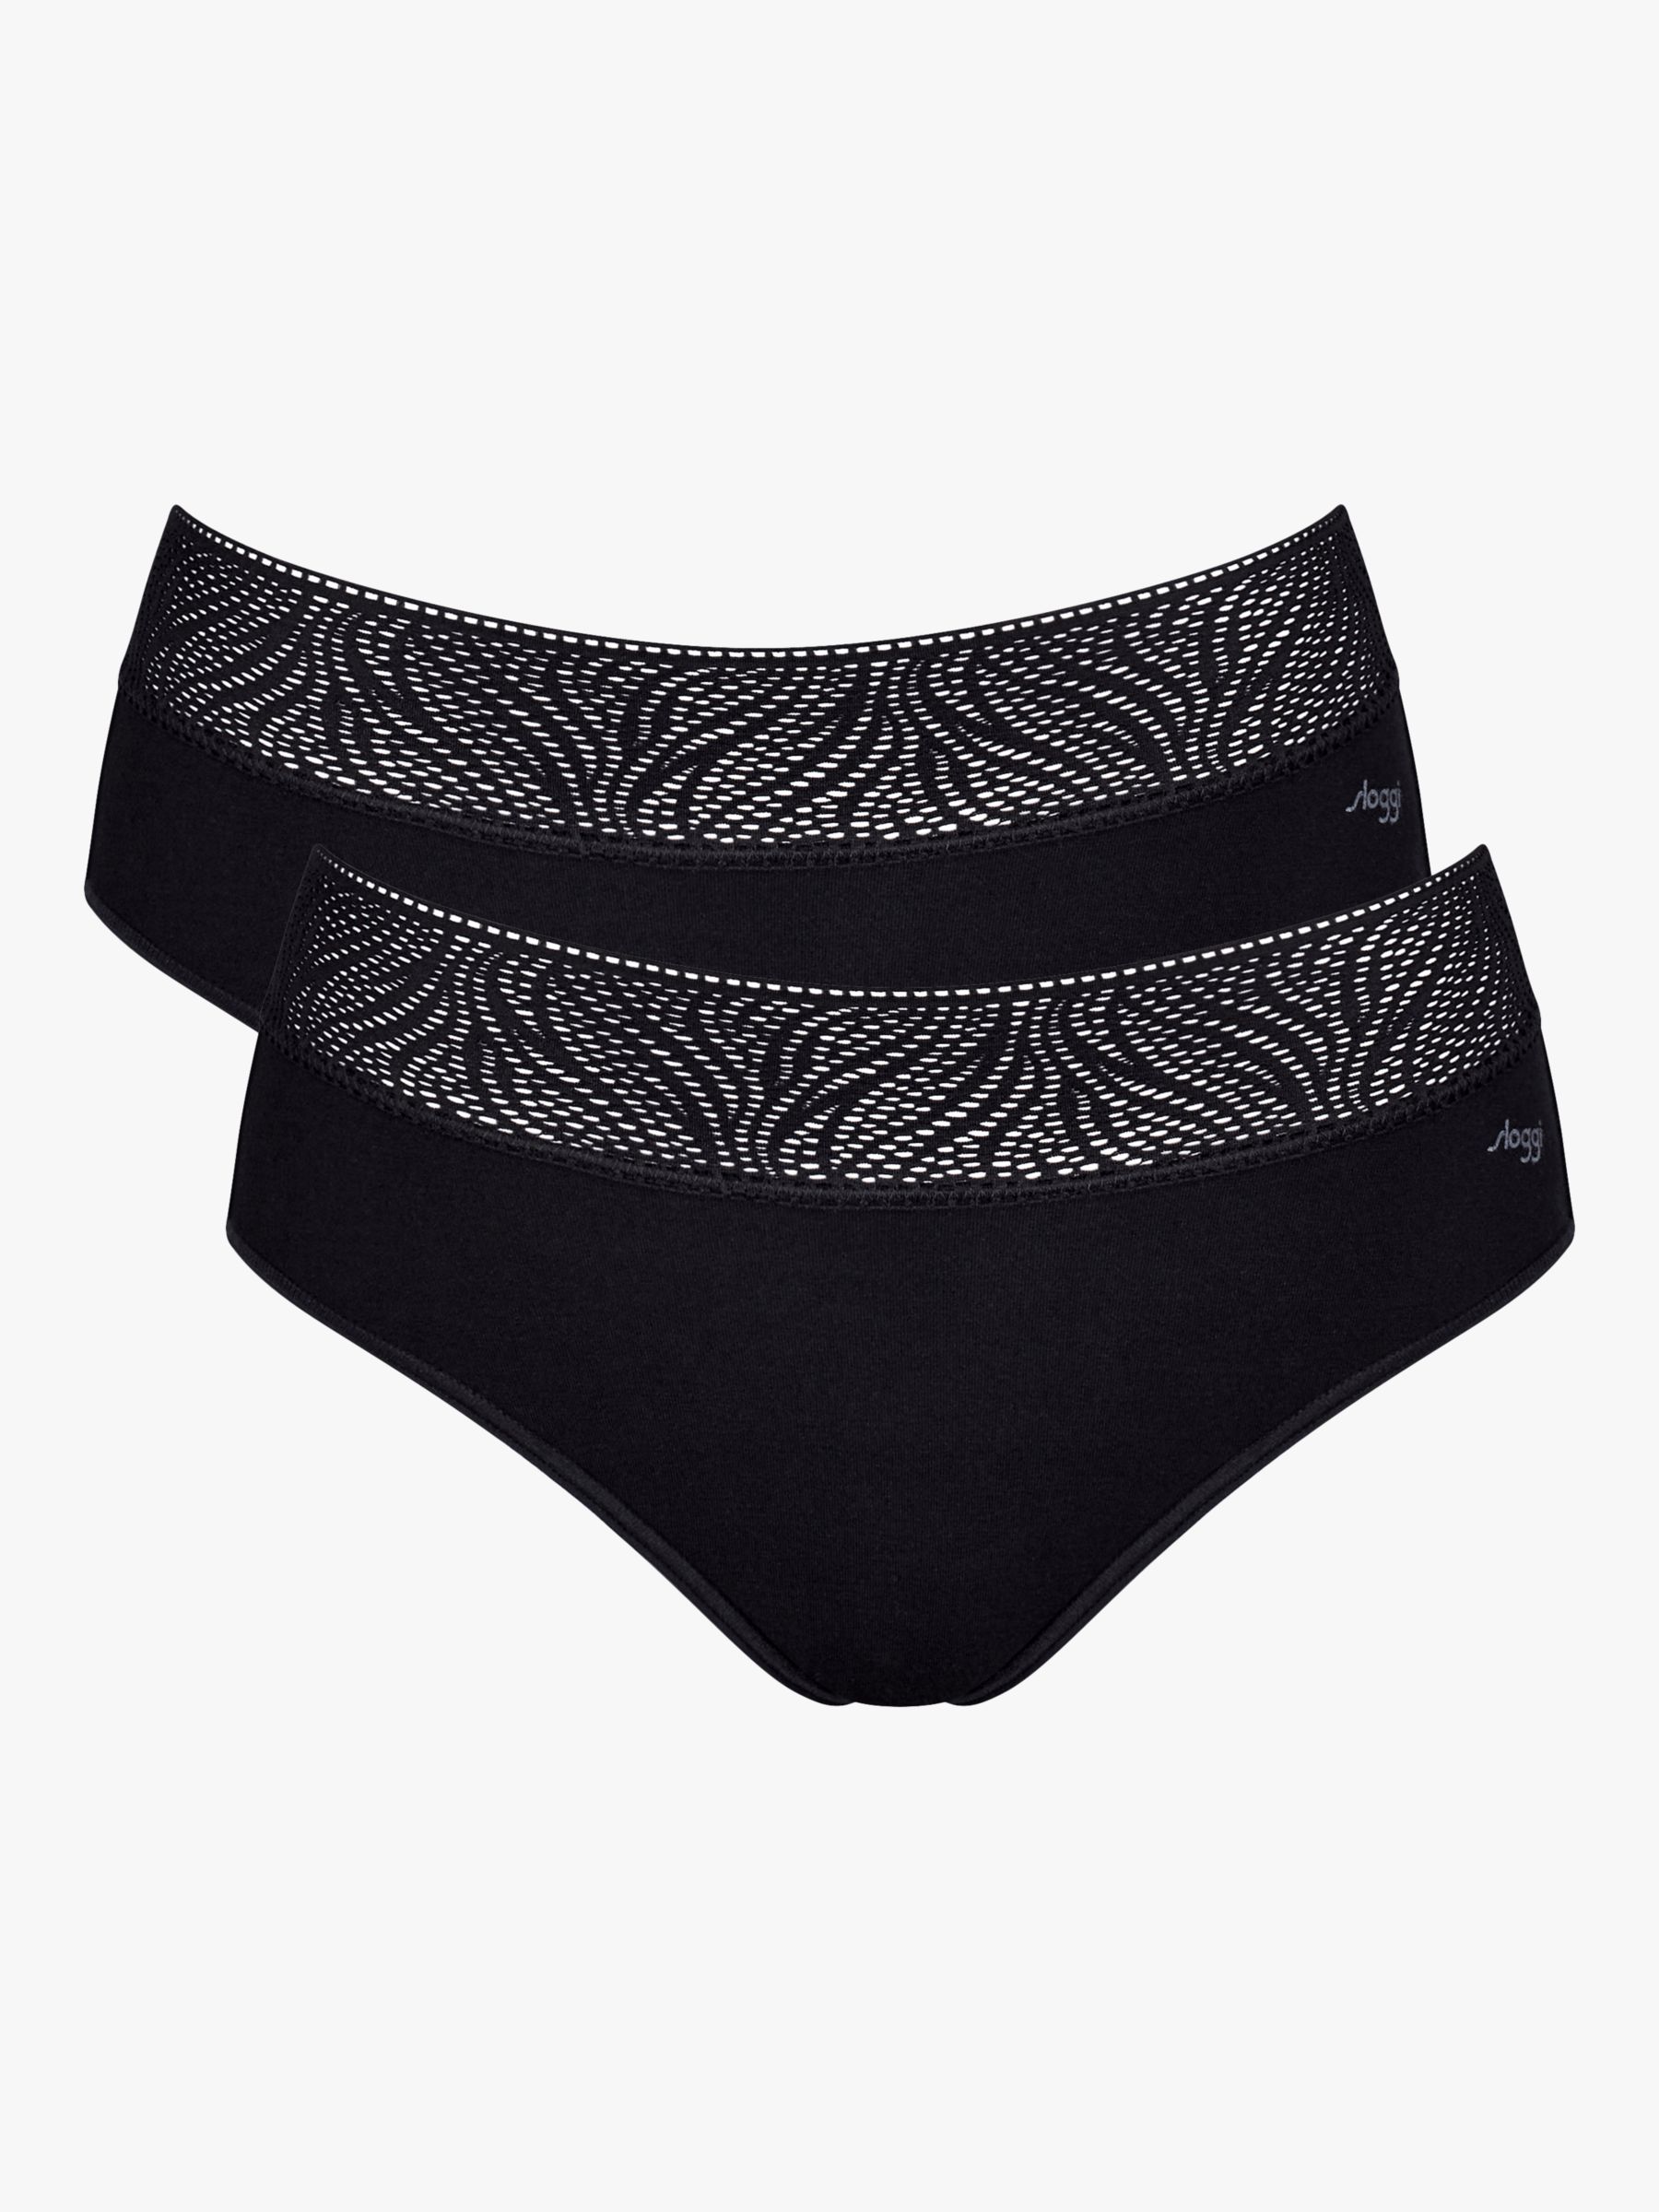 sloggi Medium Absorbency Hipster Period Knickers, Pack of 2, Black, XS